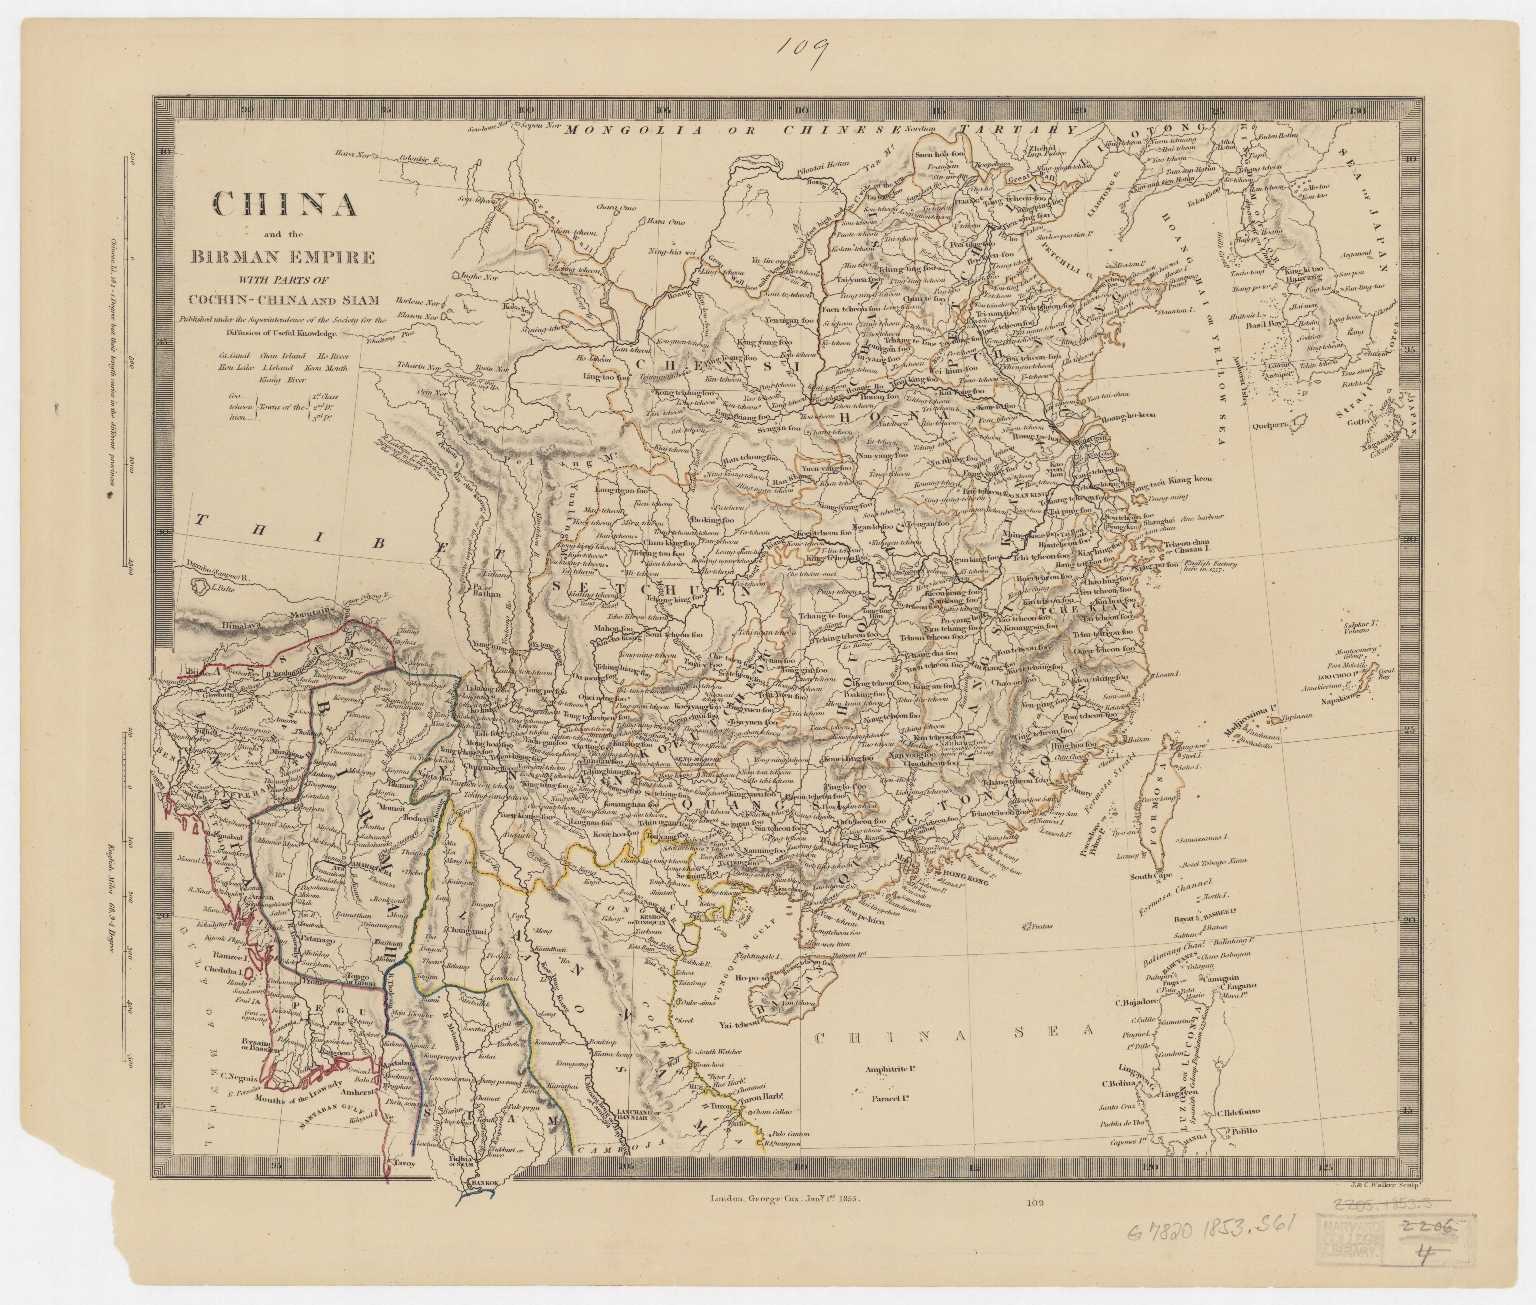 China and the Birman empire : with parts of Cochin-China and Siam